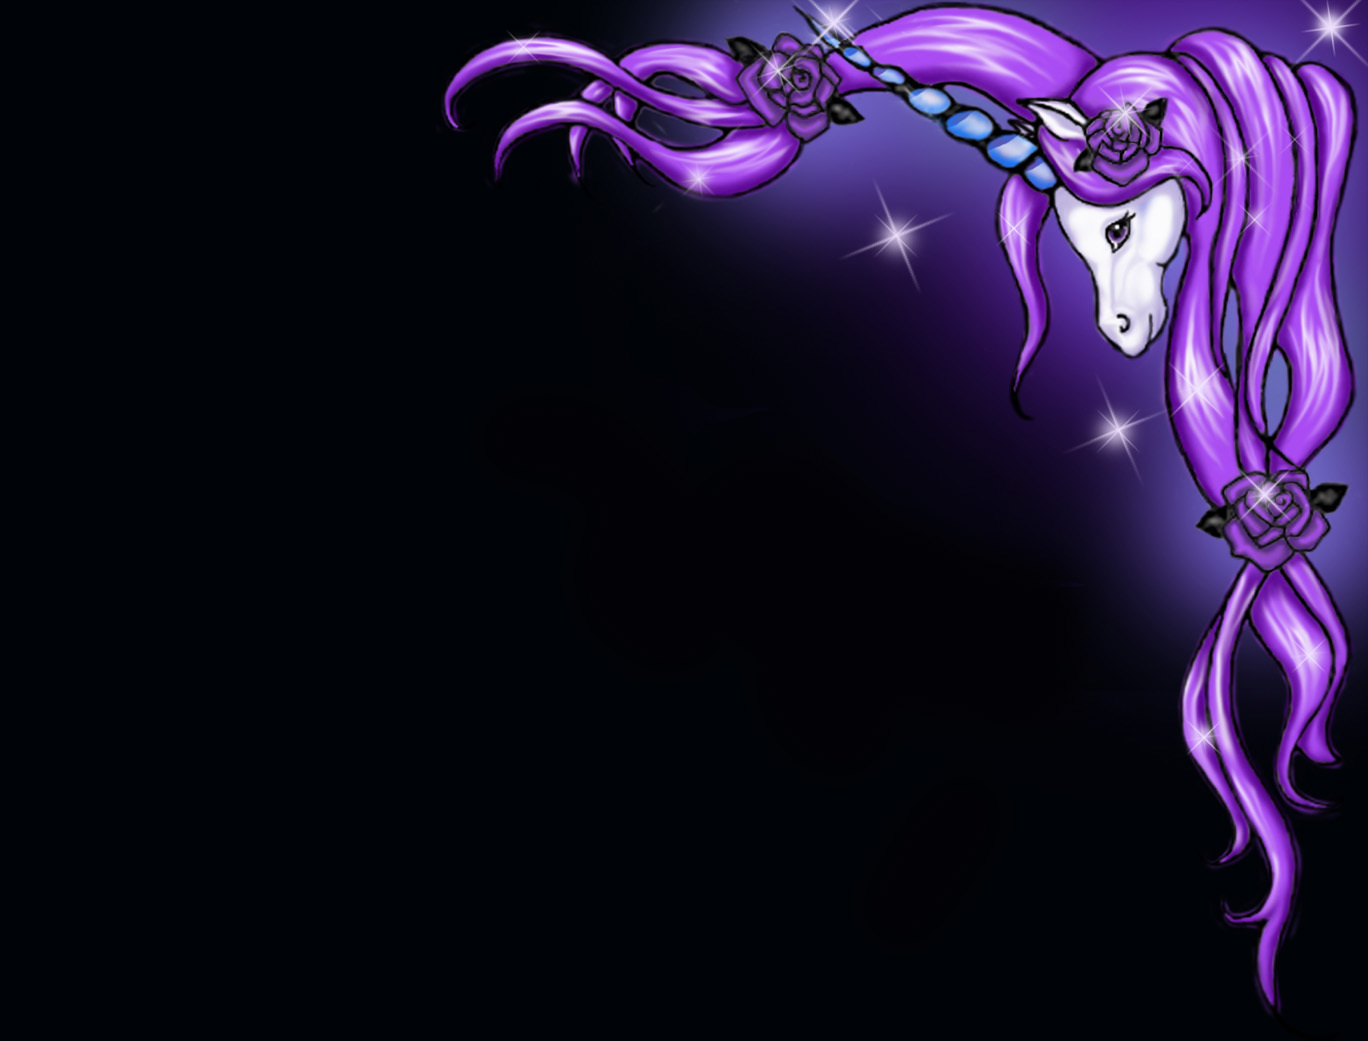 Cool Purple and Black Backgrounds HD wallpaper background